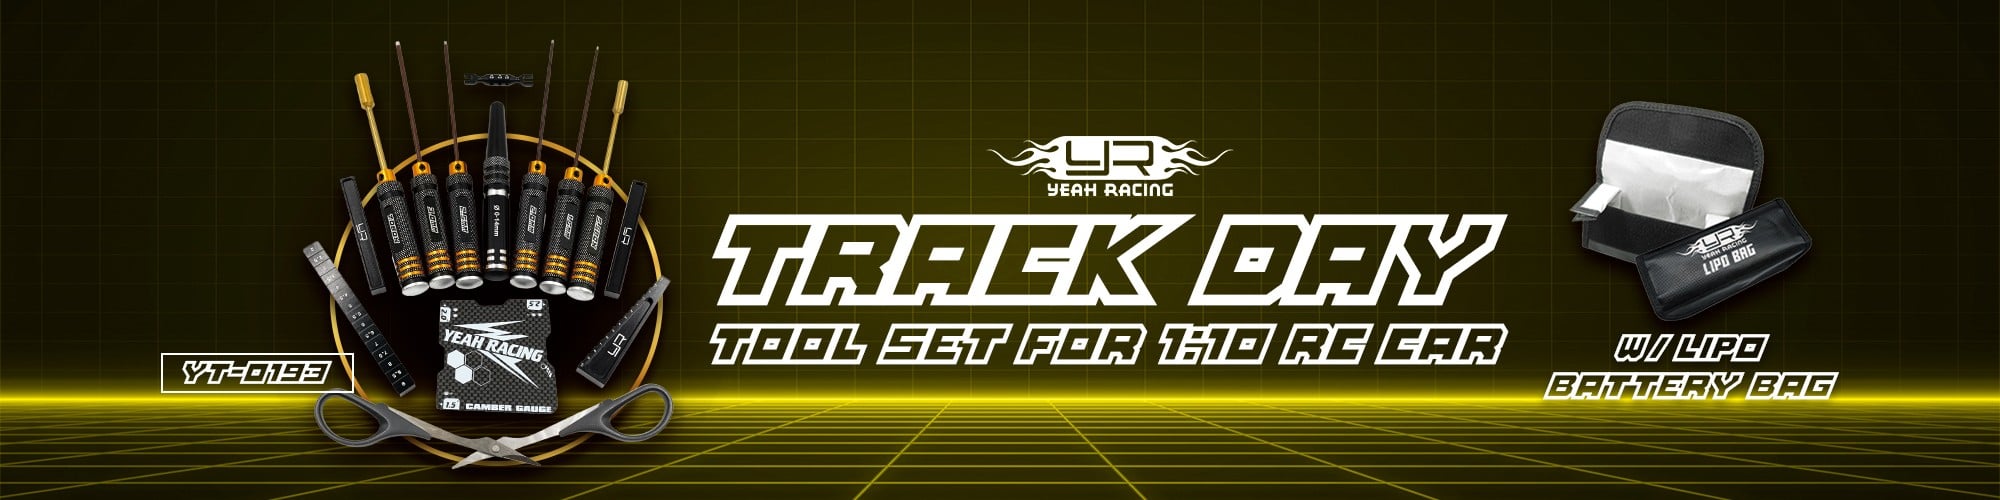 banner-track-day